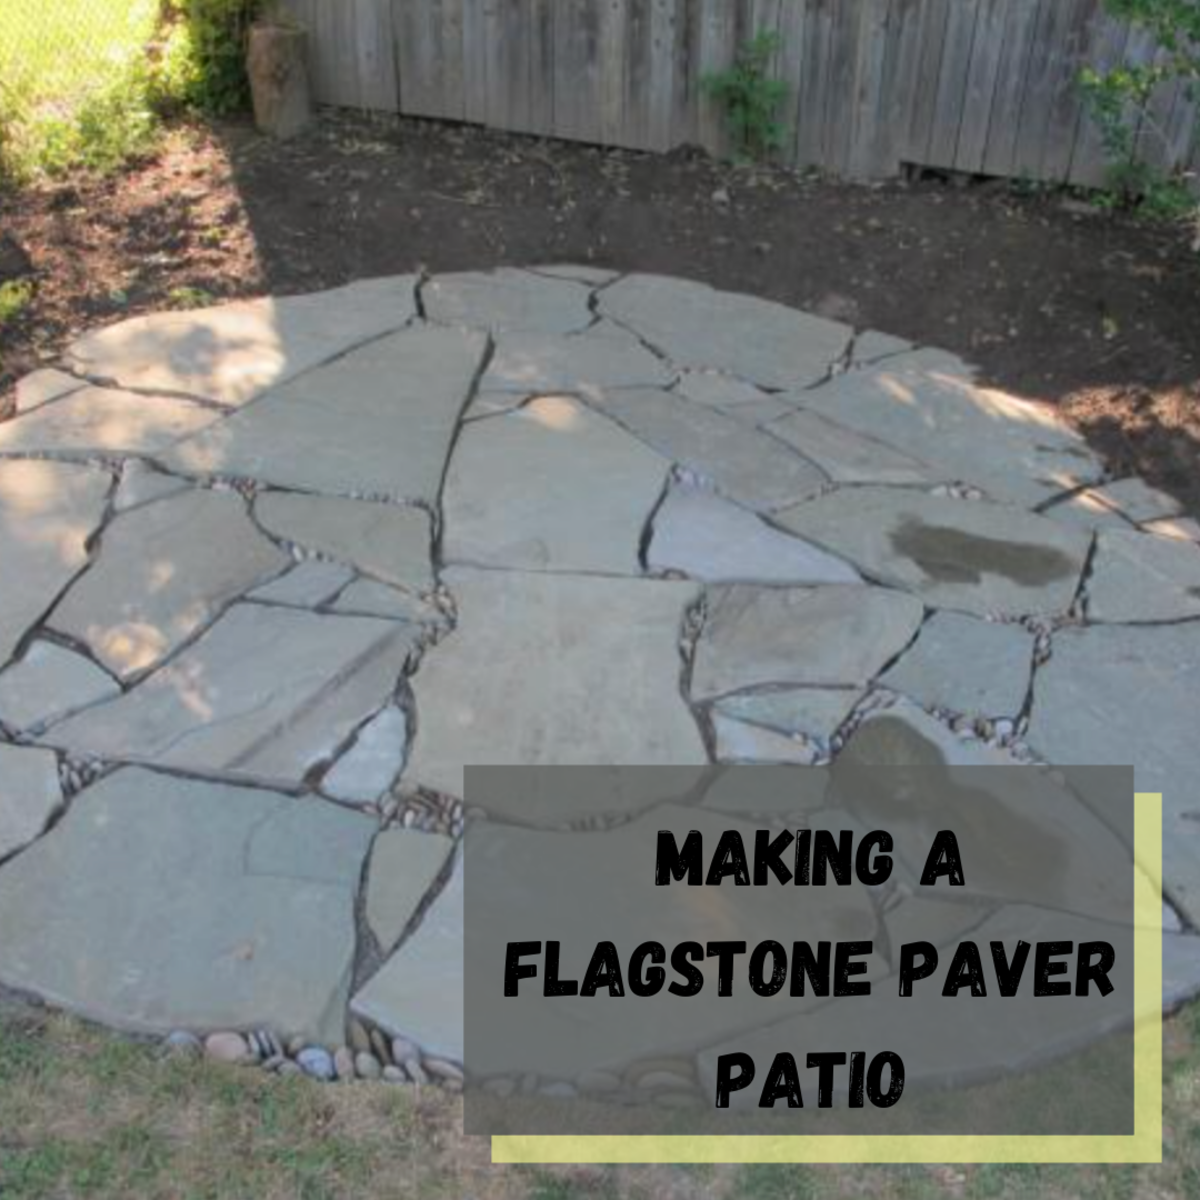 How to Lay a Flagstone Paver Patio: DIY Guide